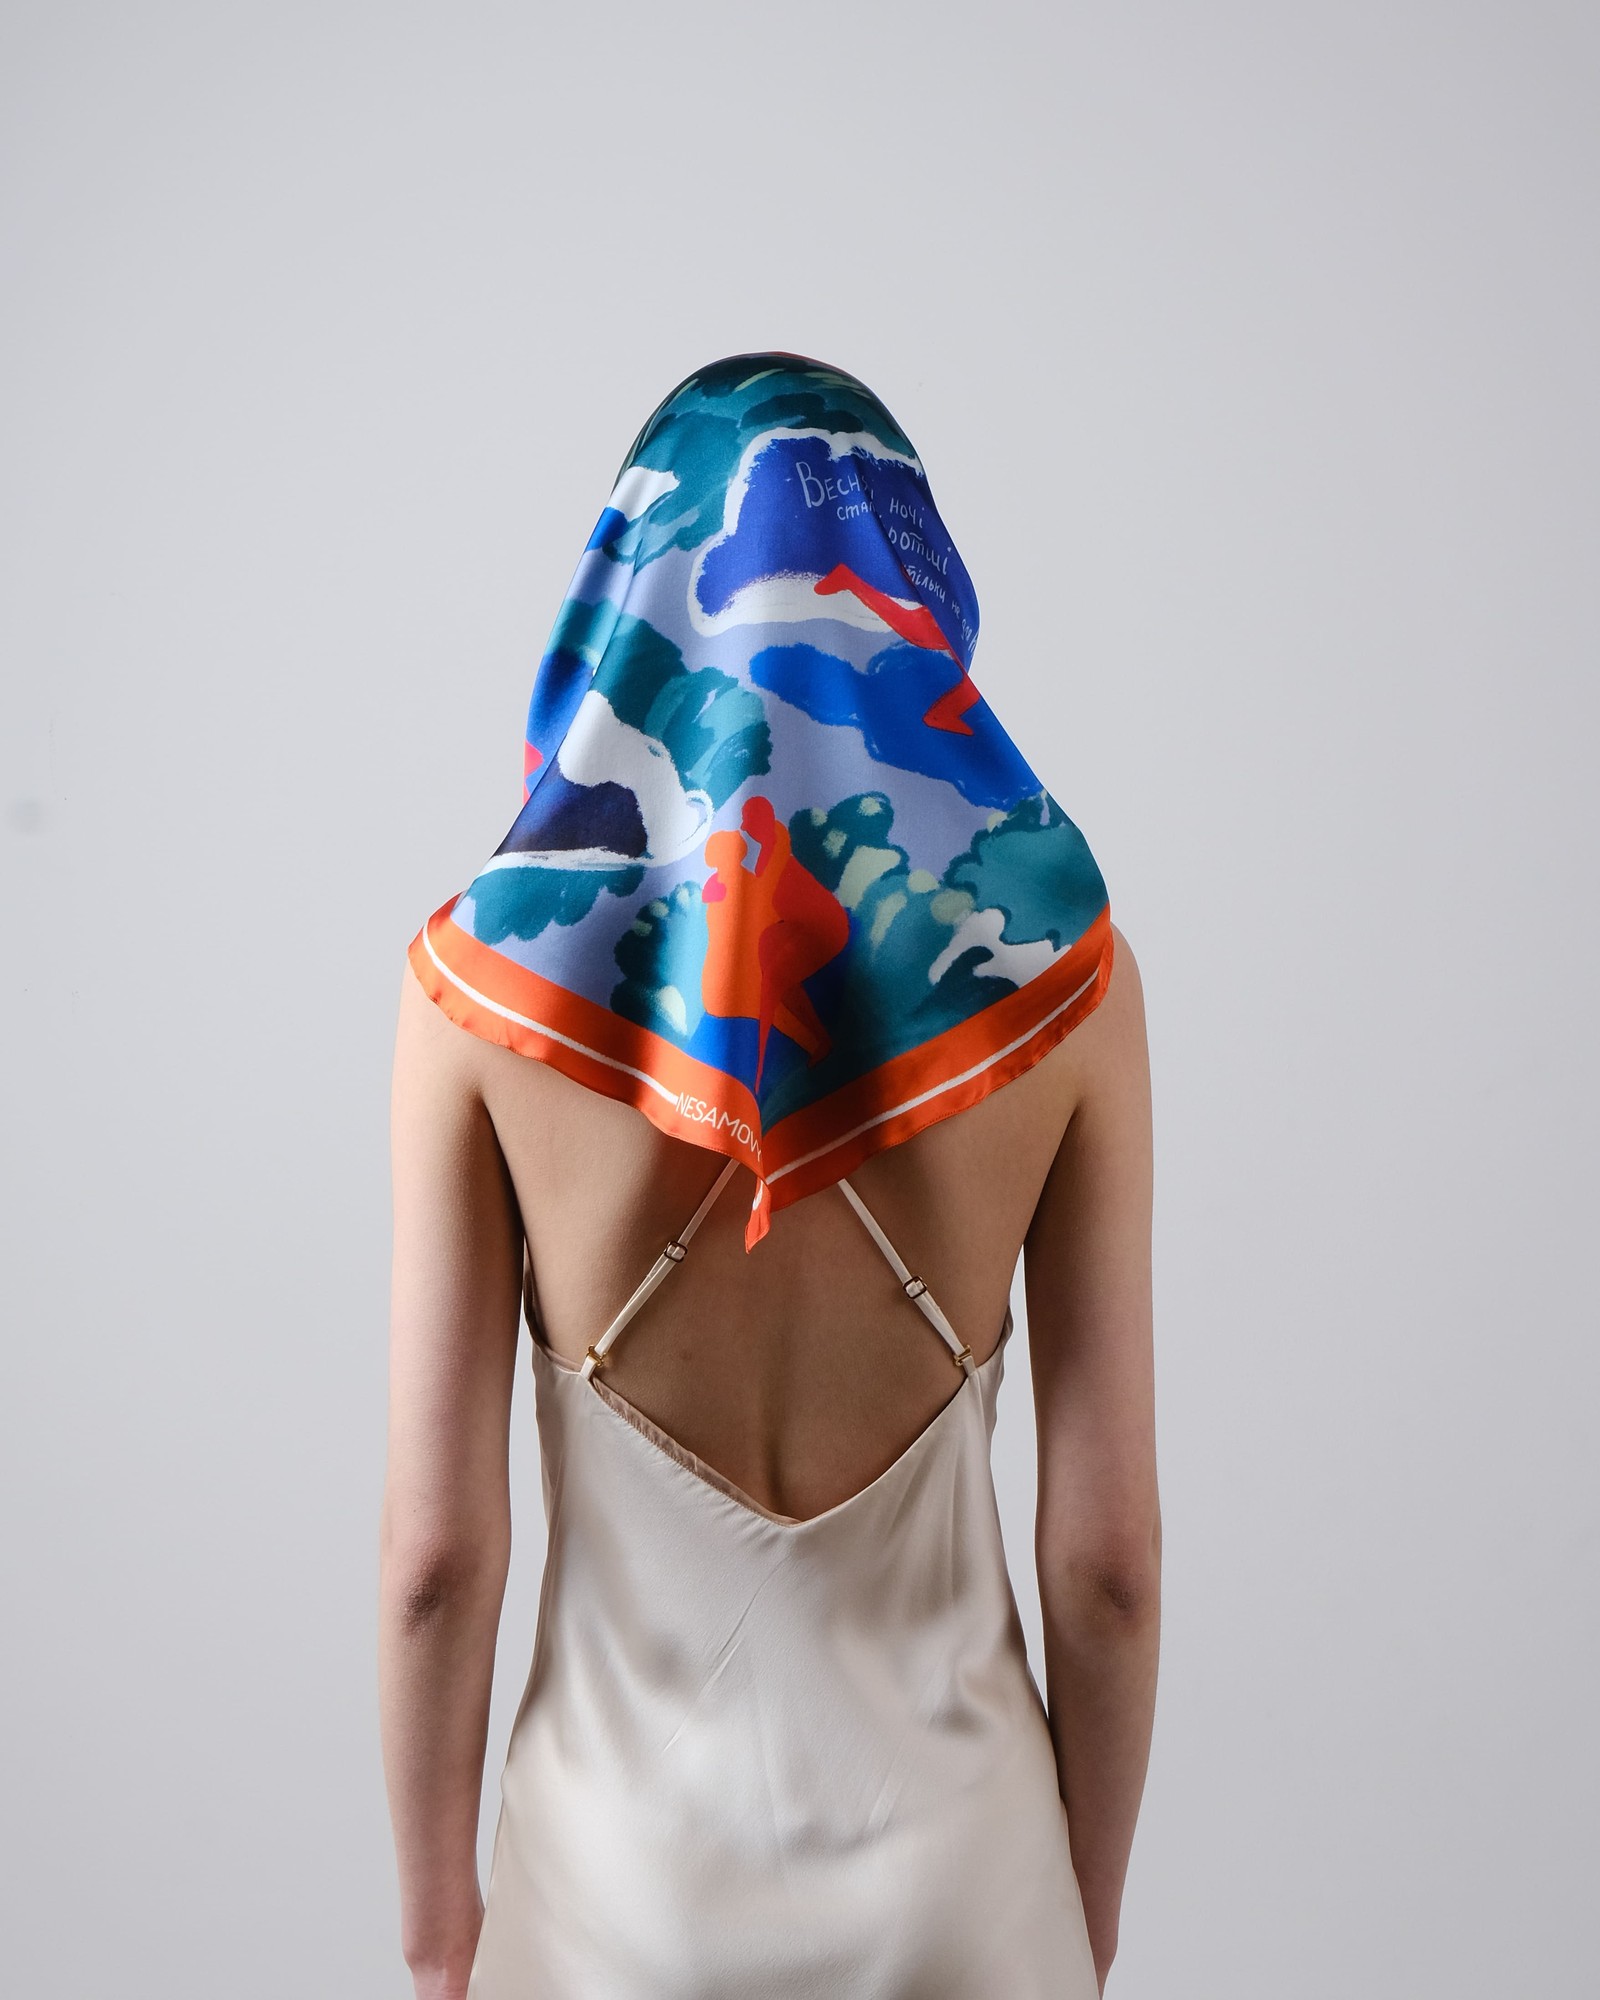 Silk scarf "Where are you now" with double-sided printing